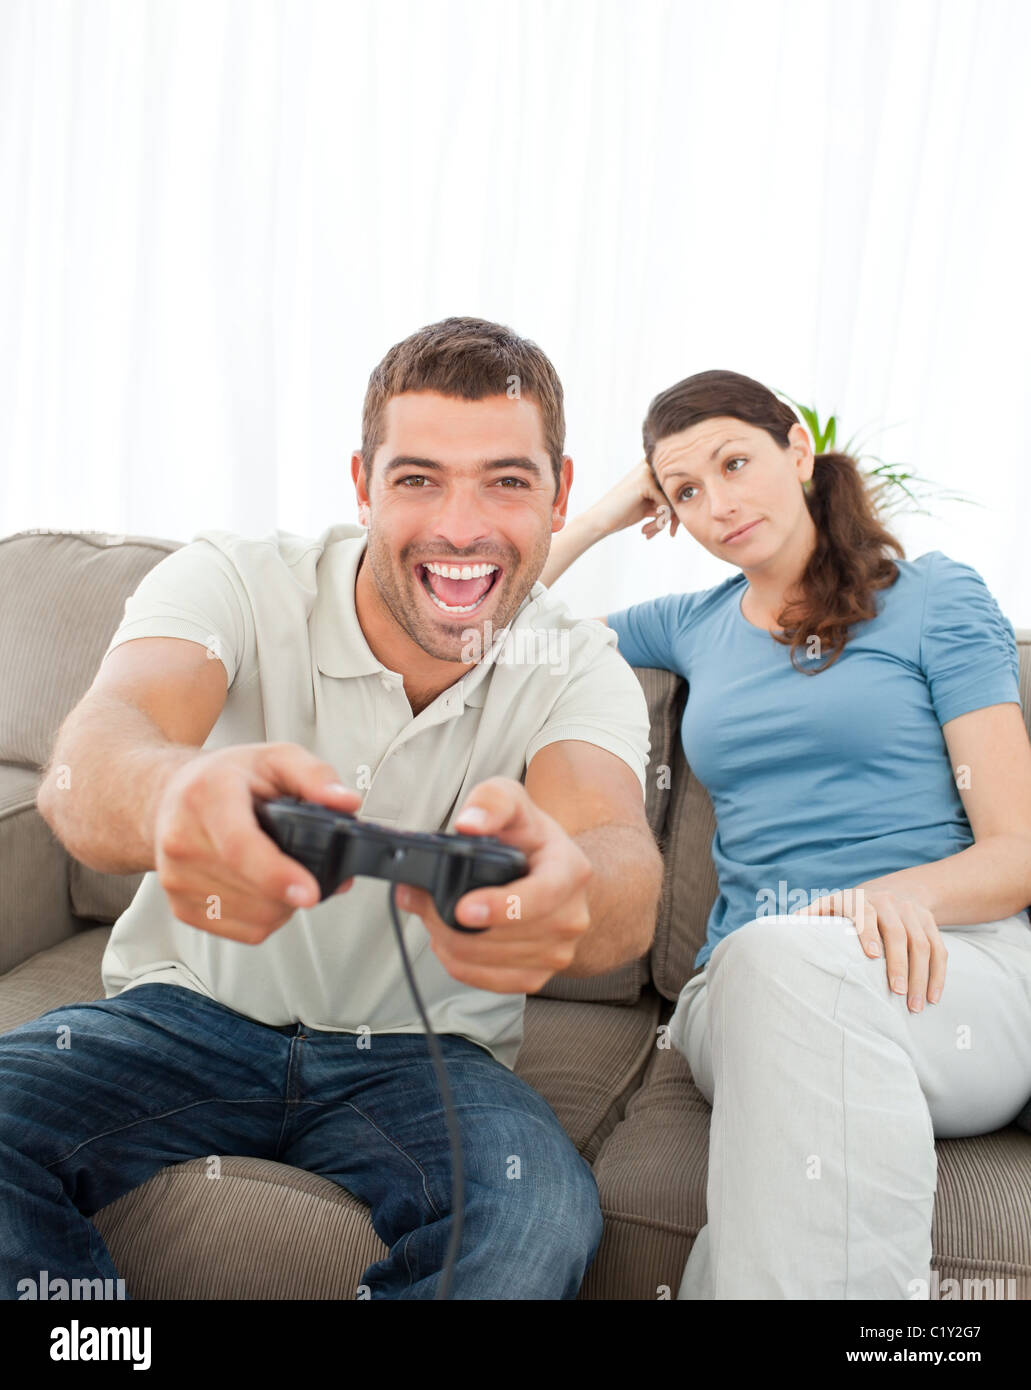 Bored woman looking at her boyfriend playing video game on the sofa Stock  Photo - Alamy